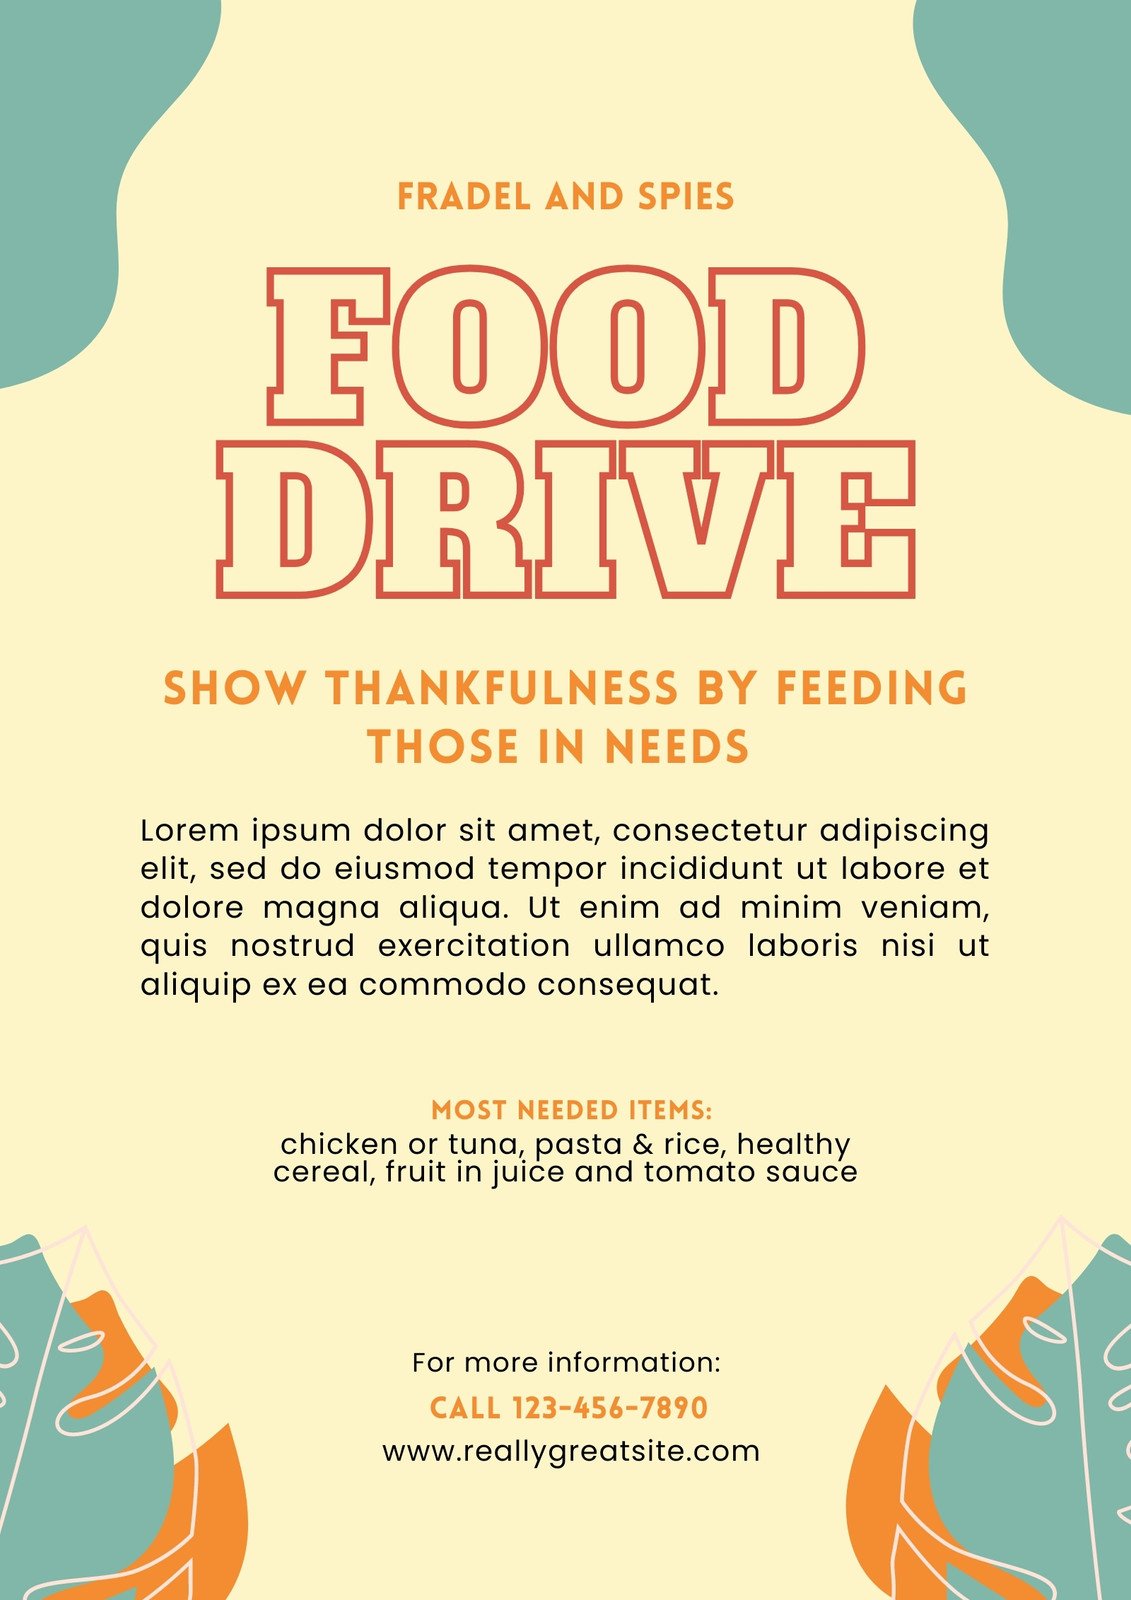 Canned Food Drive Poster Ideas: Eye Catching Designs to Boost Donations